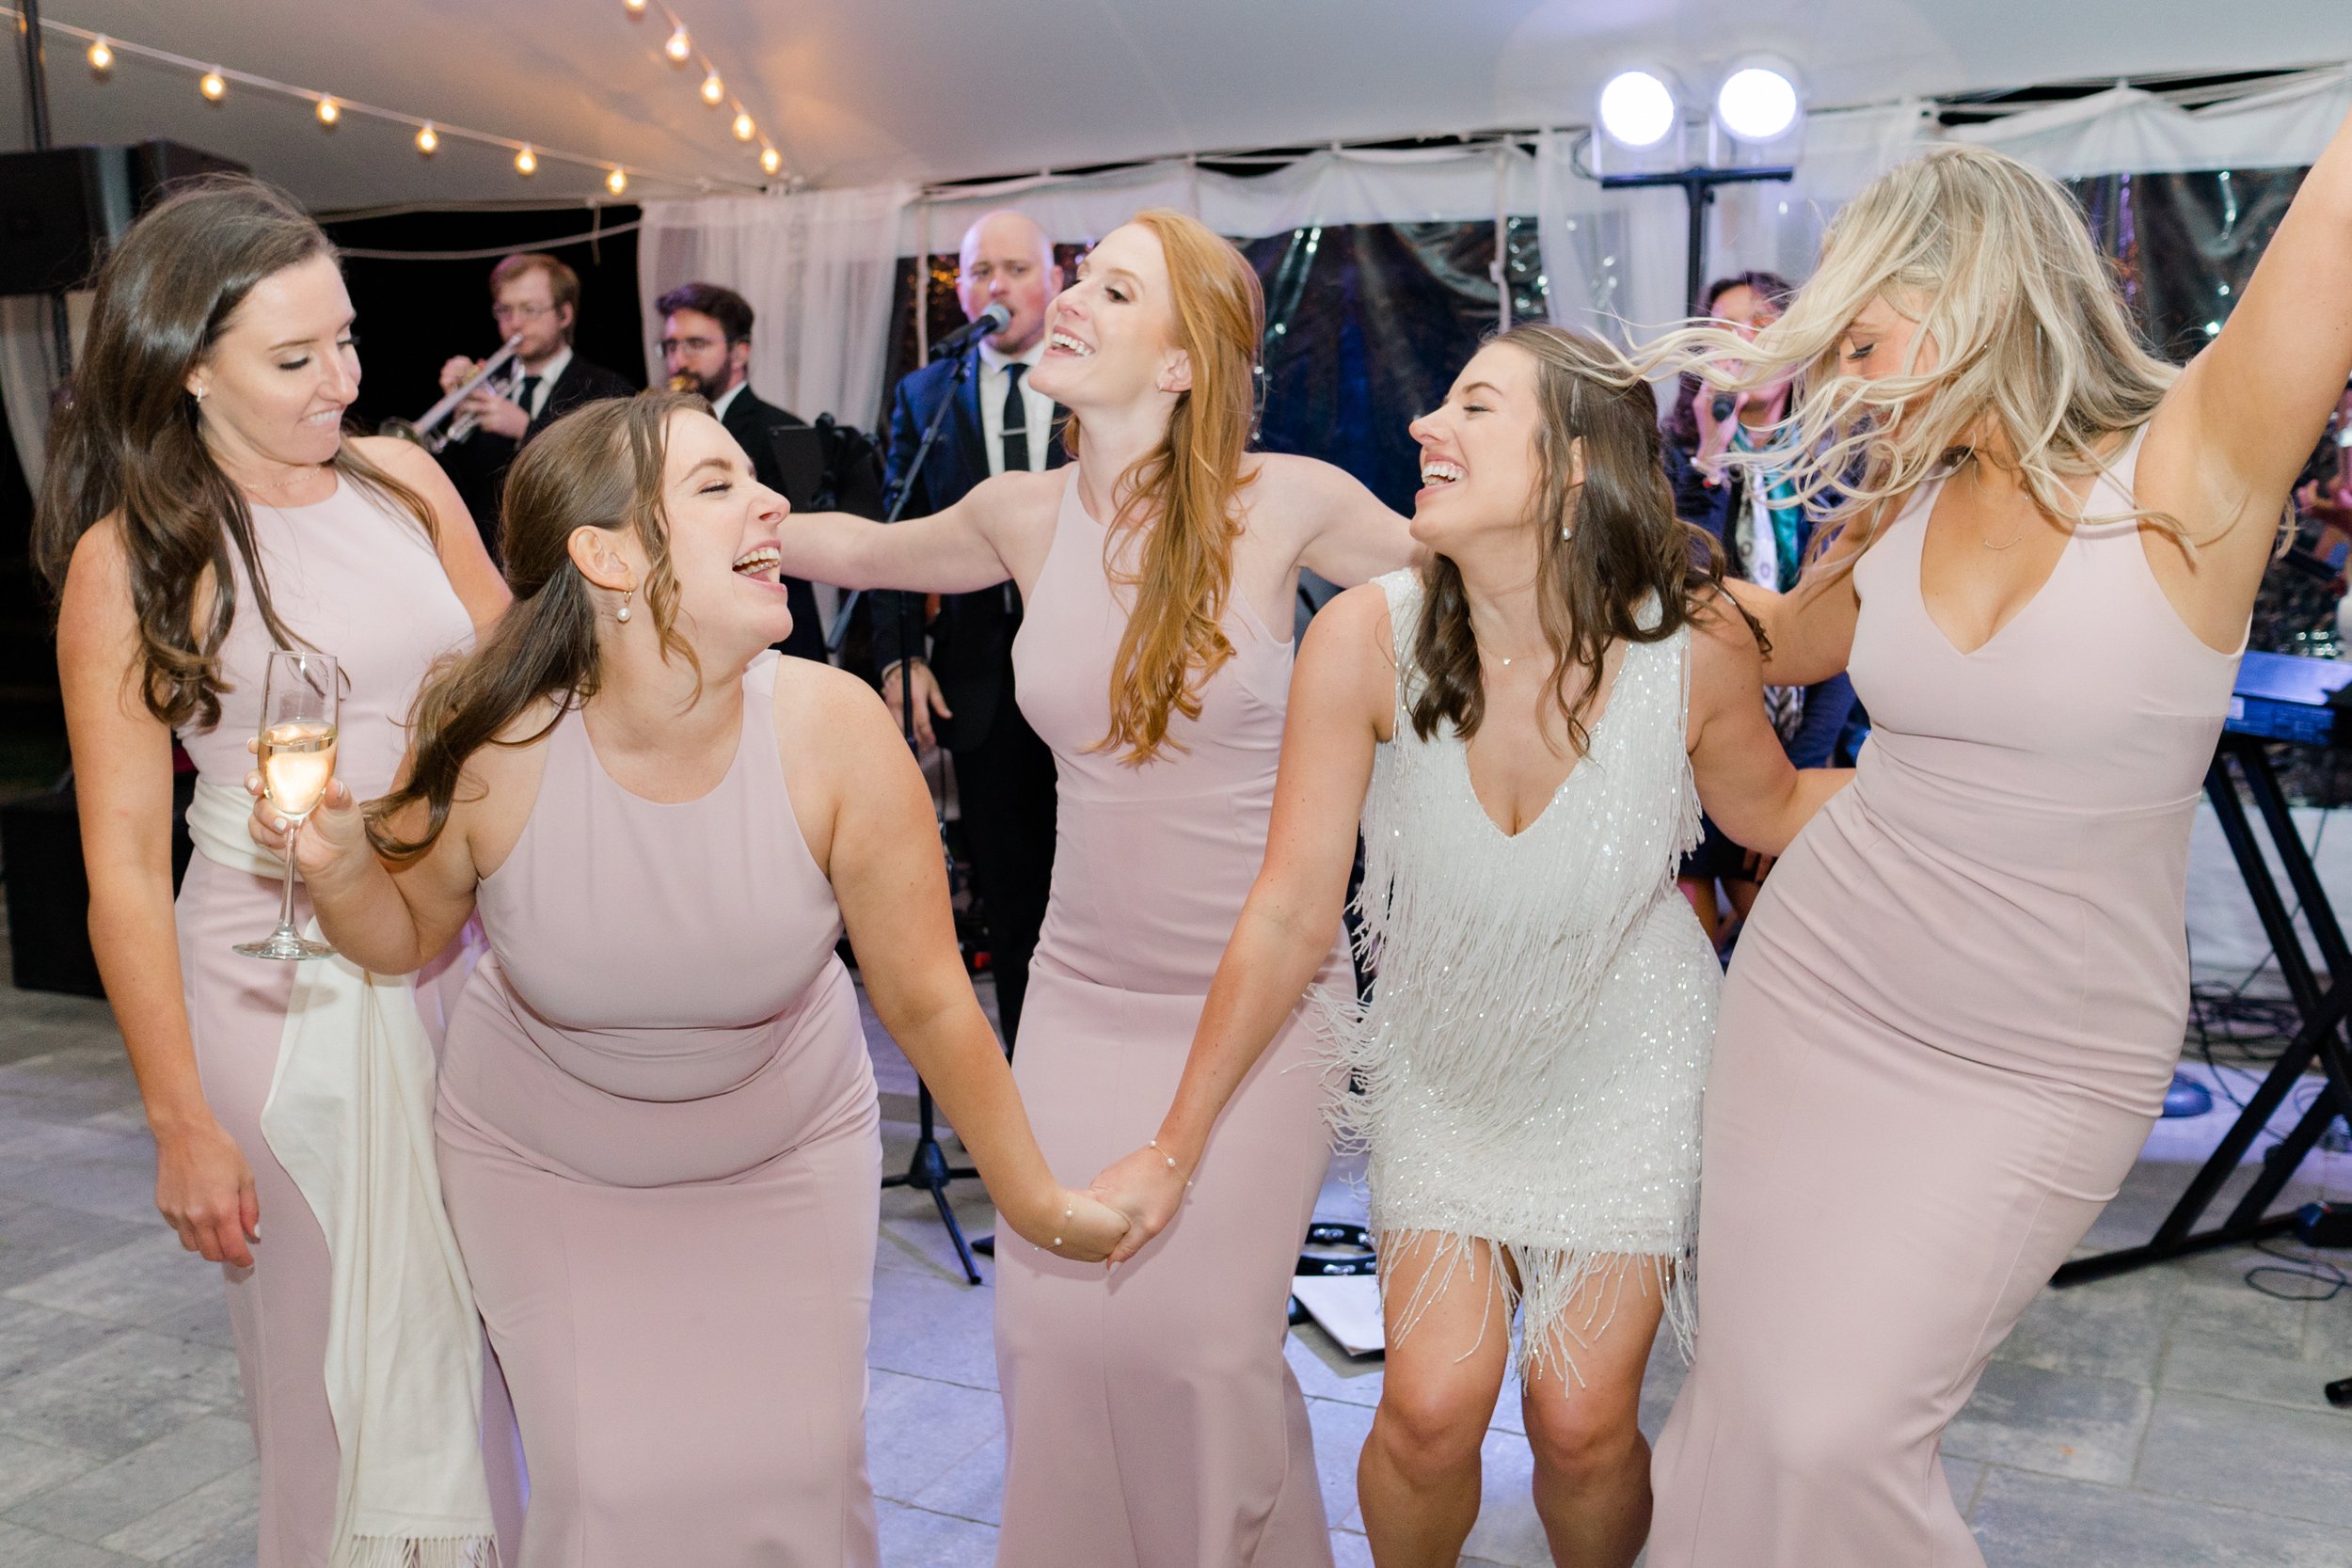 Bride and bridesmaids get down on the dance floor. Bride changes into fun second dress. Boston wedding photographer.